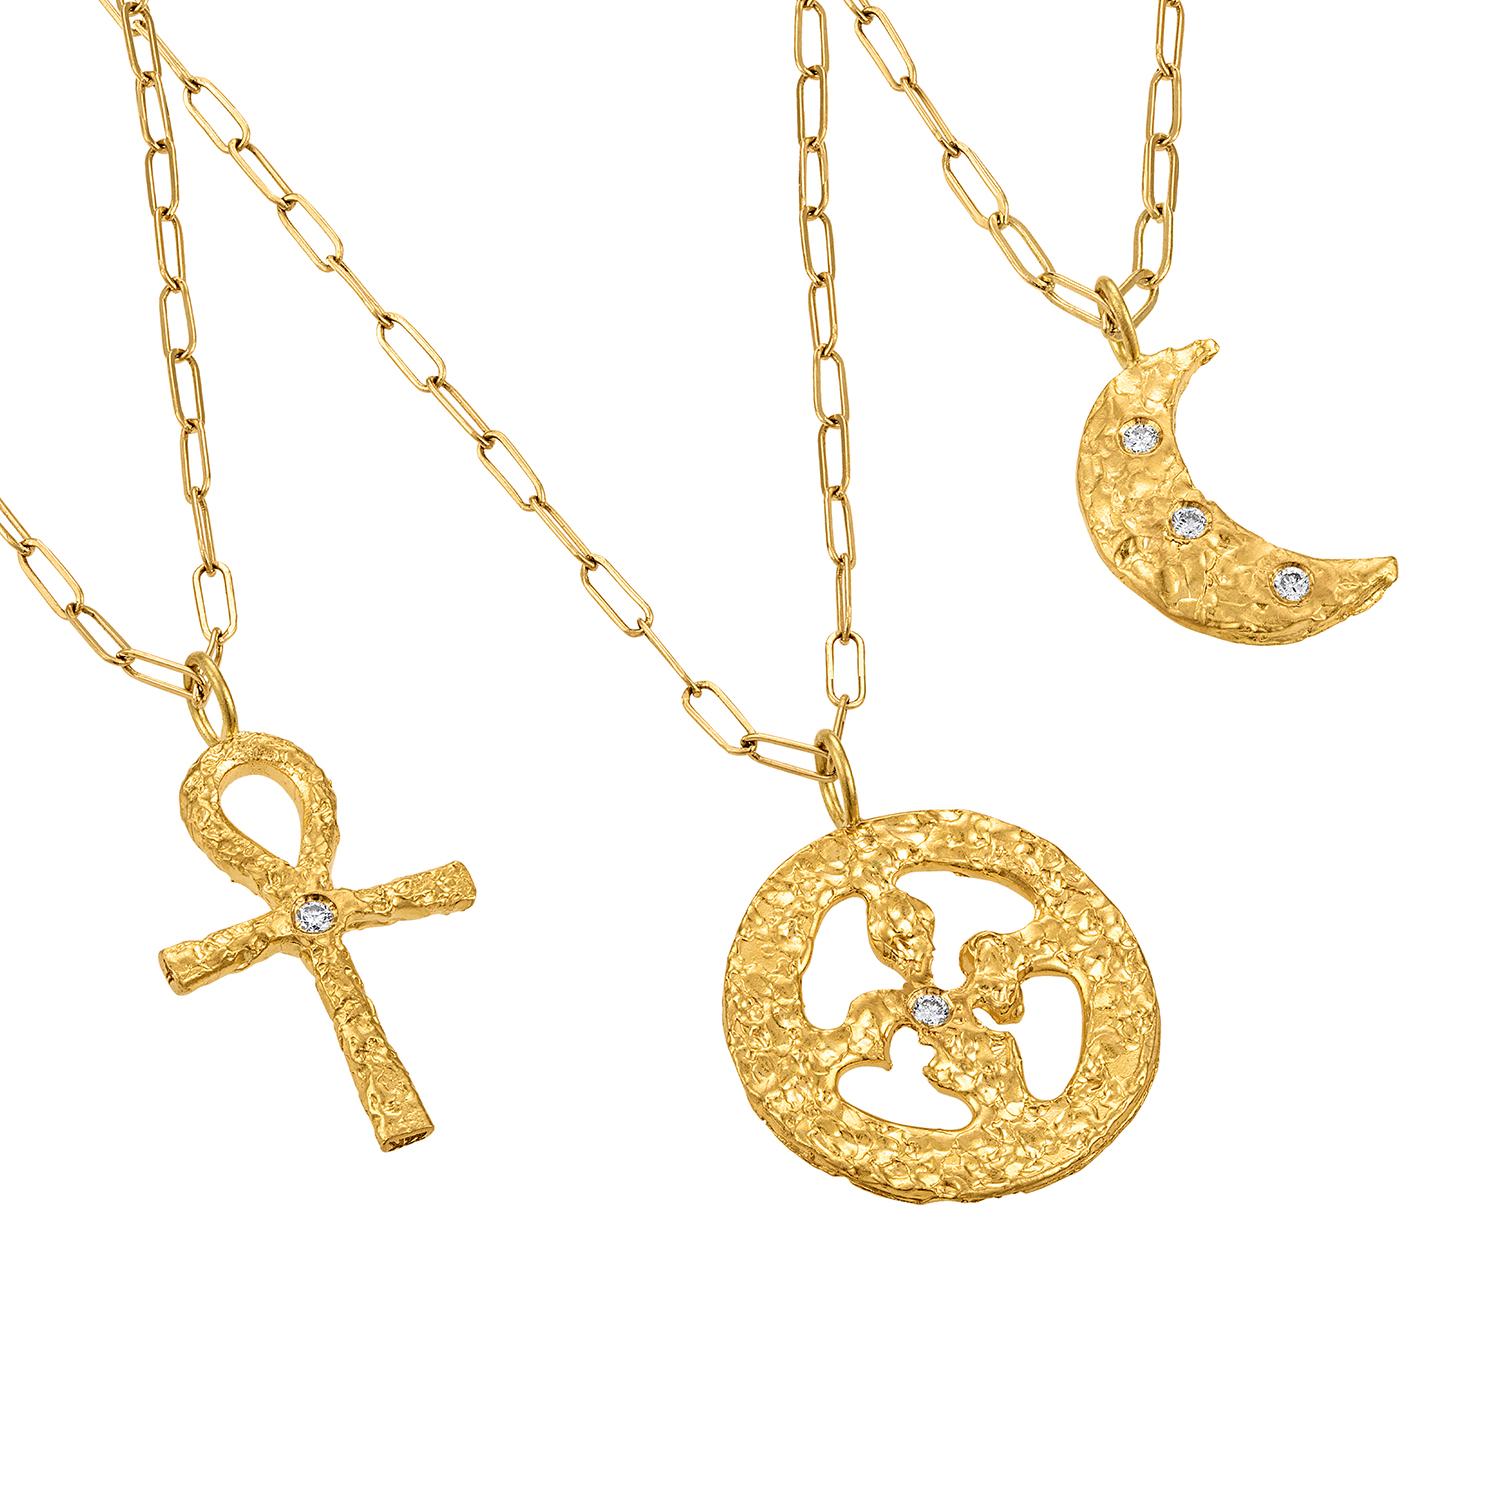 This exquisite diamond Ankh Pendant is a stunning piece that combines modern design with timeless elegance. It is a unique meaningful piece of jewelry. Handmade from solid 22k gold and features the iconic Ankh symbol, know as the 